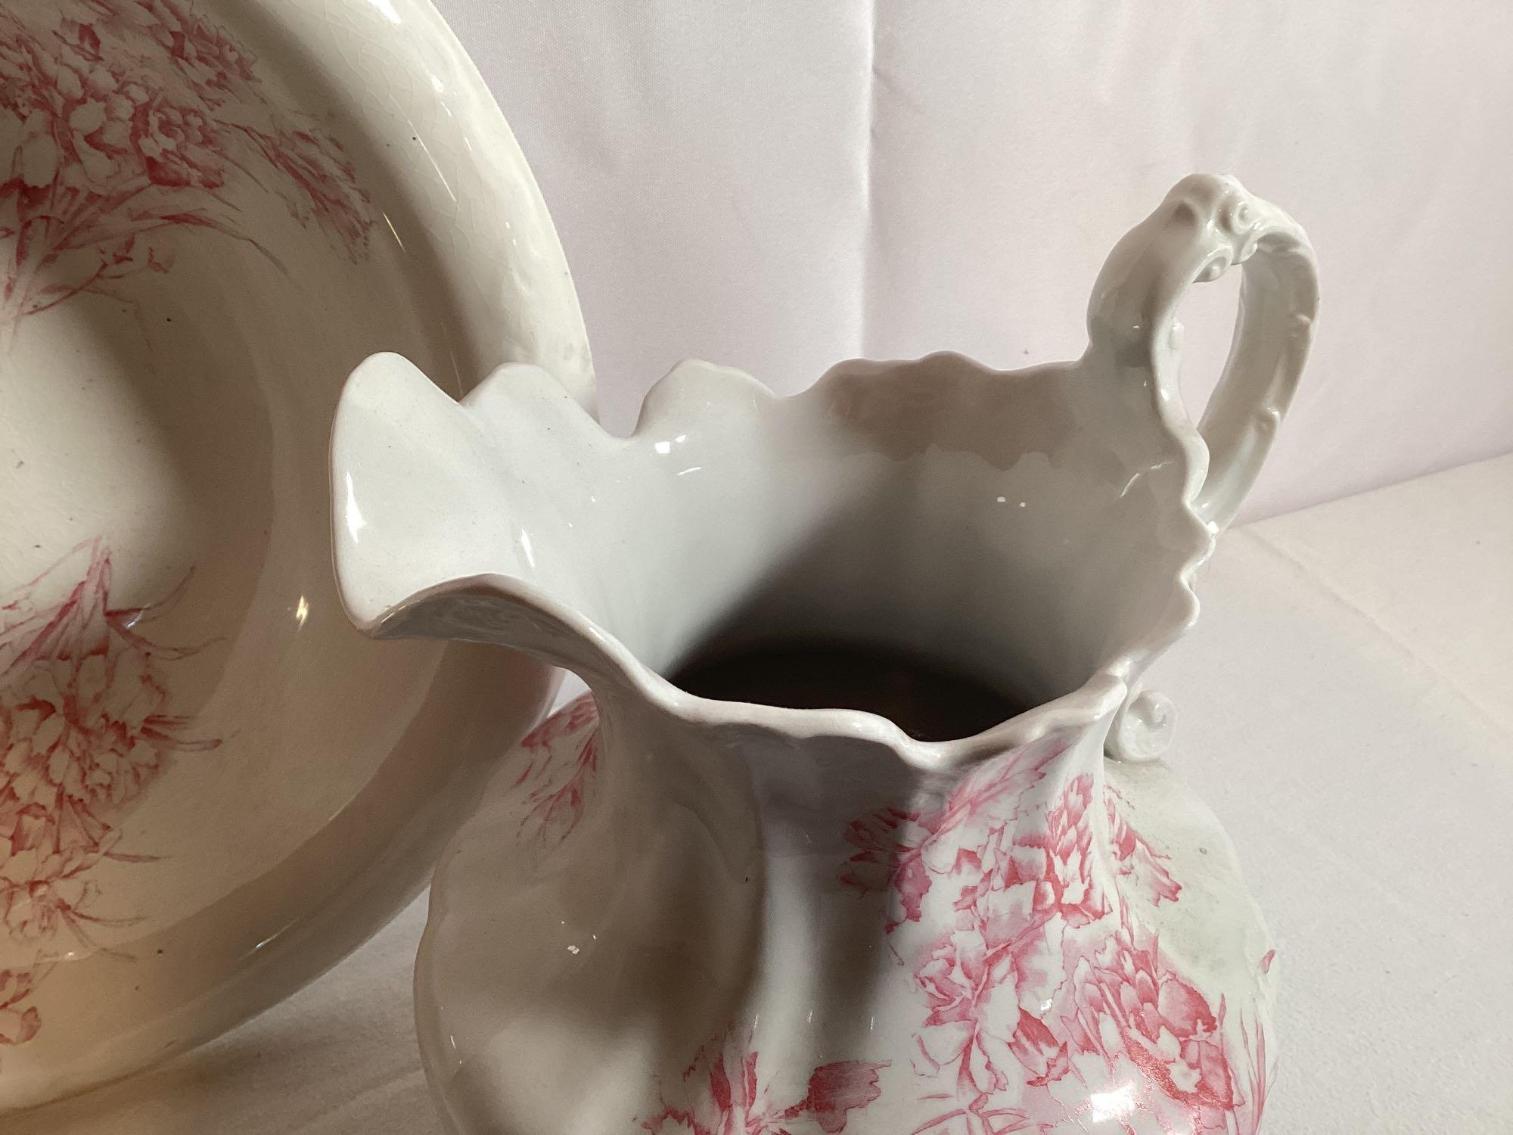 Image for Bowl and Pitcher set